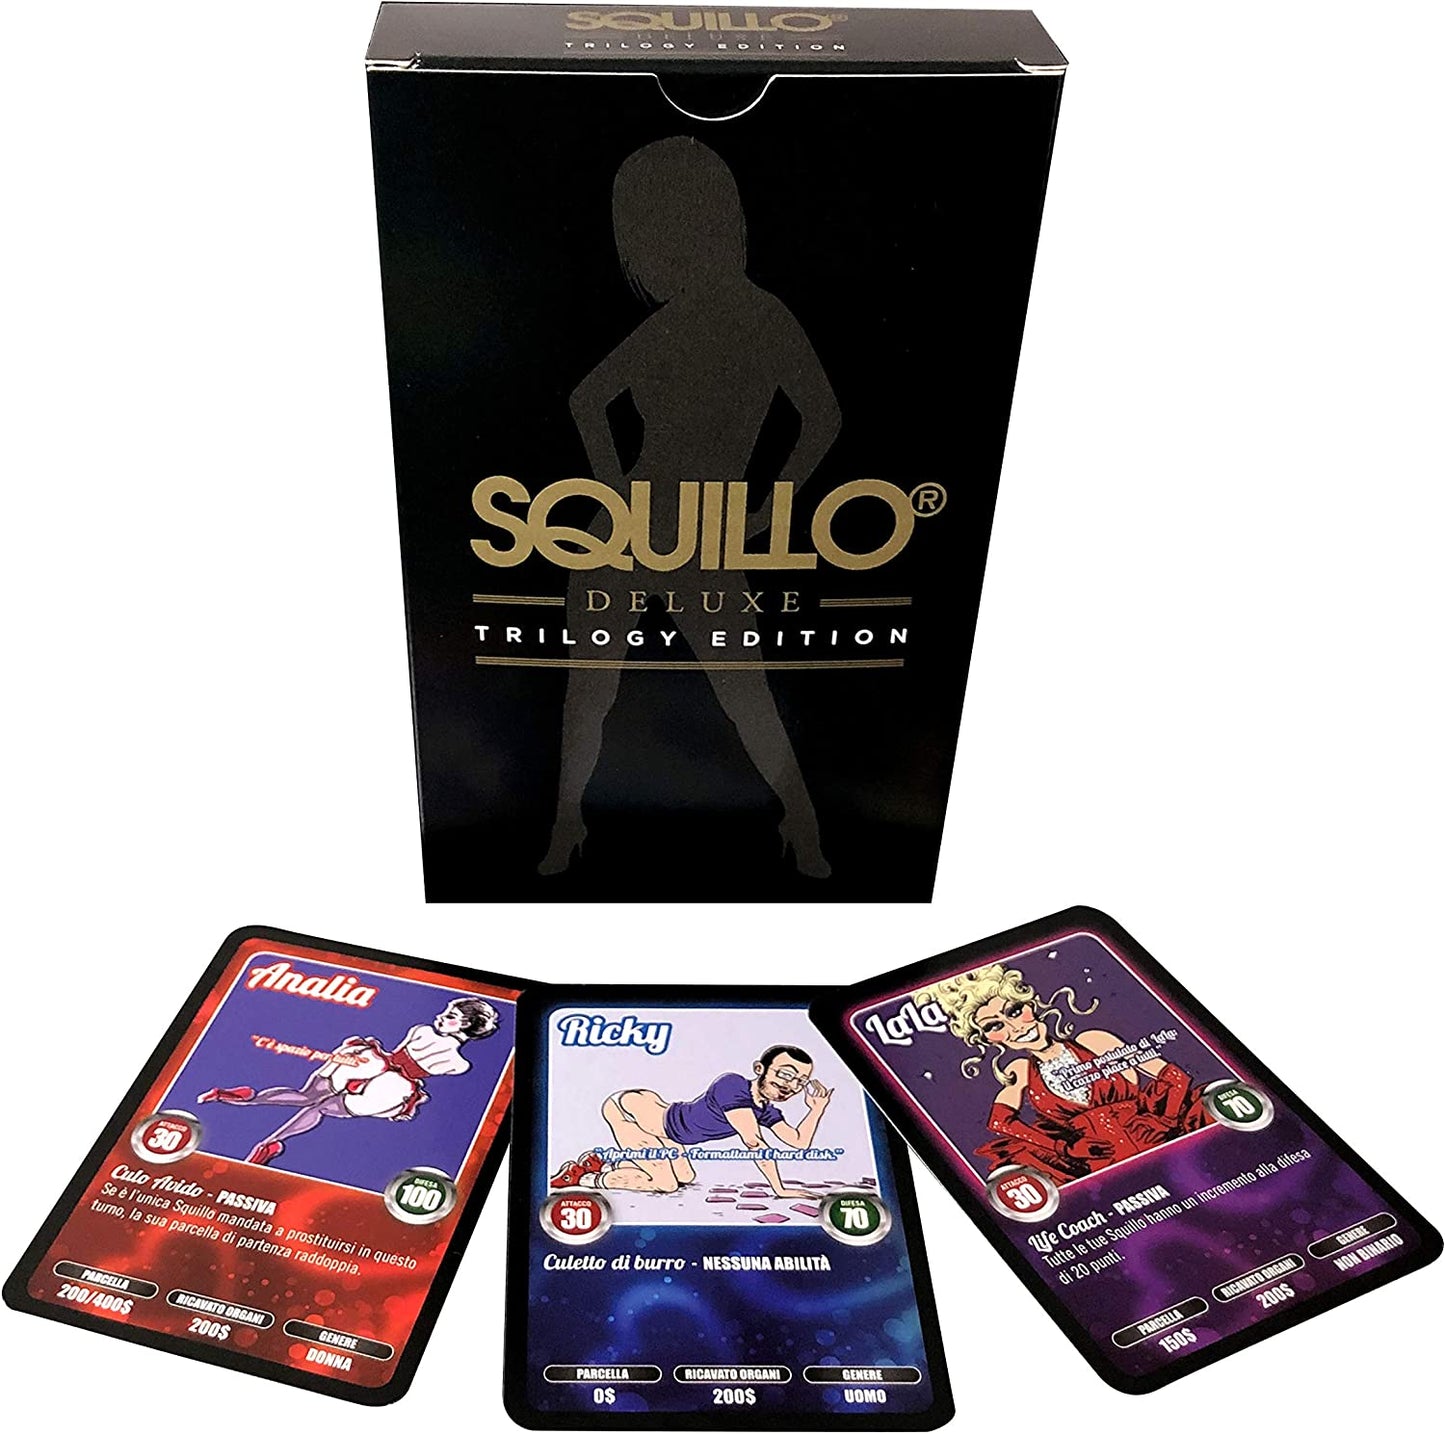 Squillo Deluxe Trilogy Edition